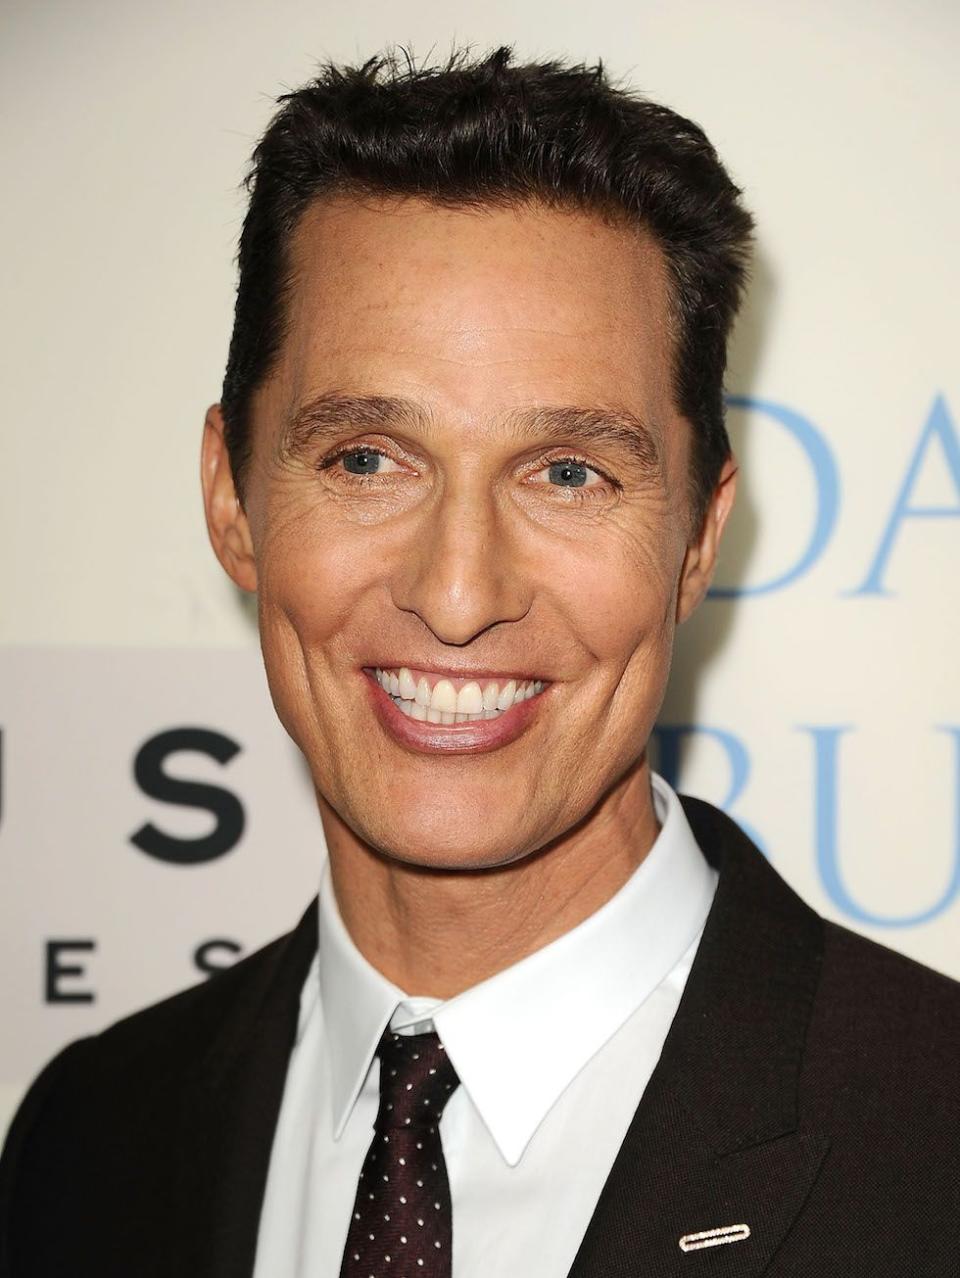 ...and here's Matthew McConaughey in 2013.